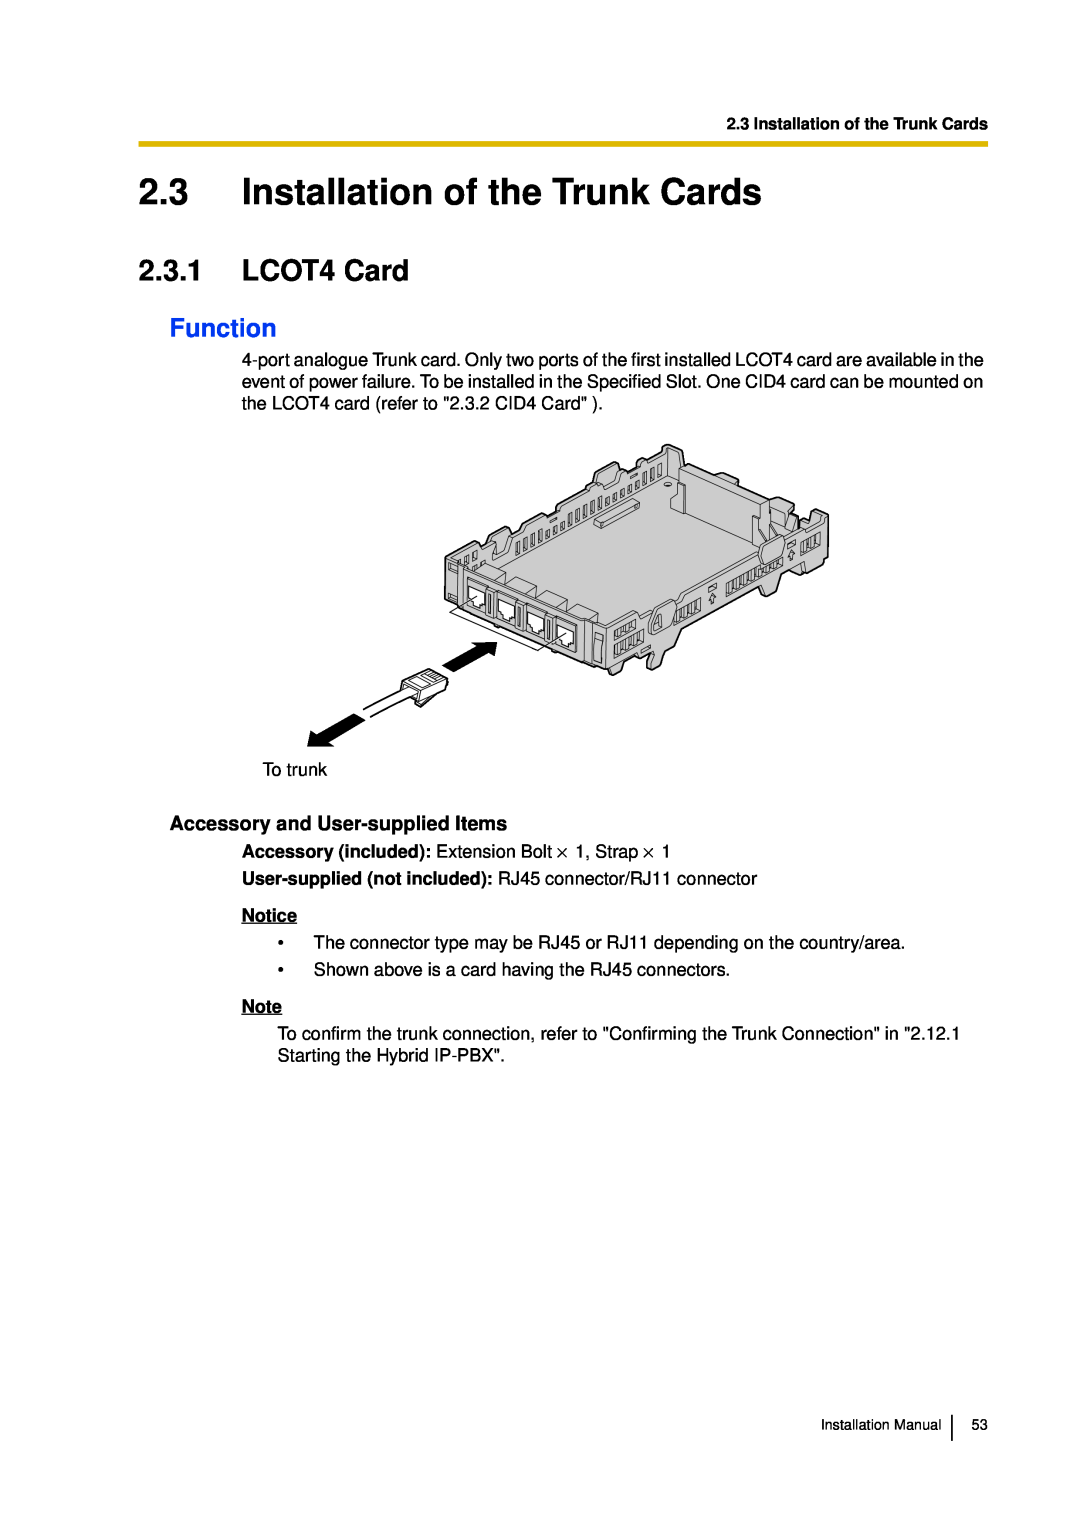 Panasonic KX-TDA30 installation manual 2.3Installation of the Trunk Cards, 2.3.1LCOT4 Card, Function, Notice 